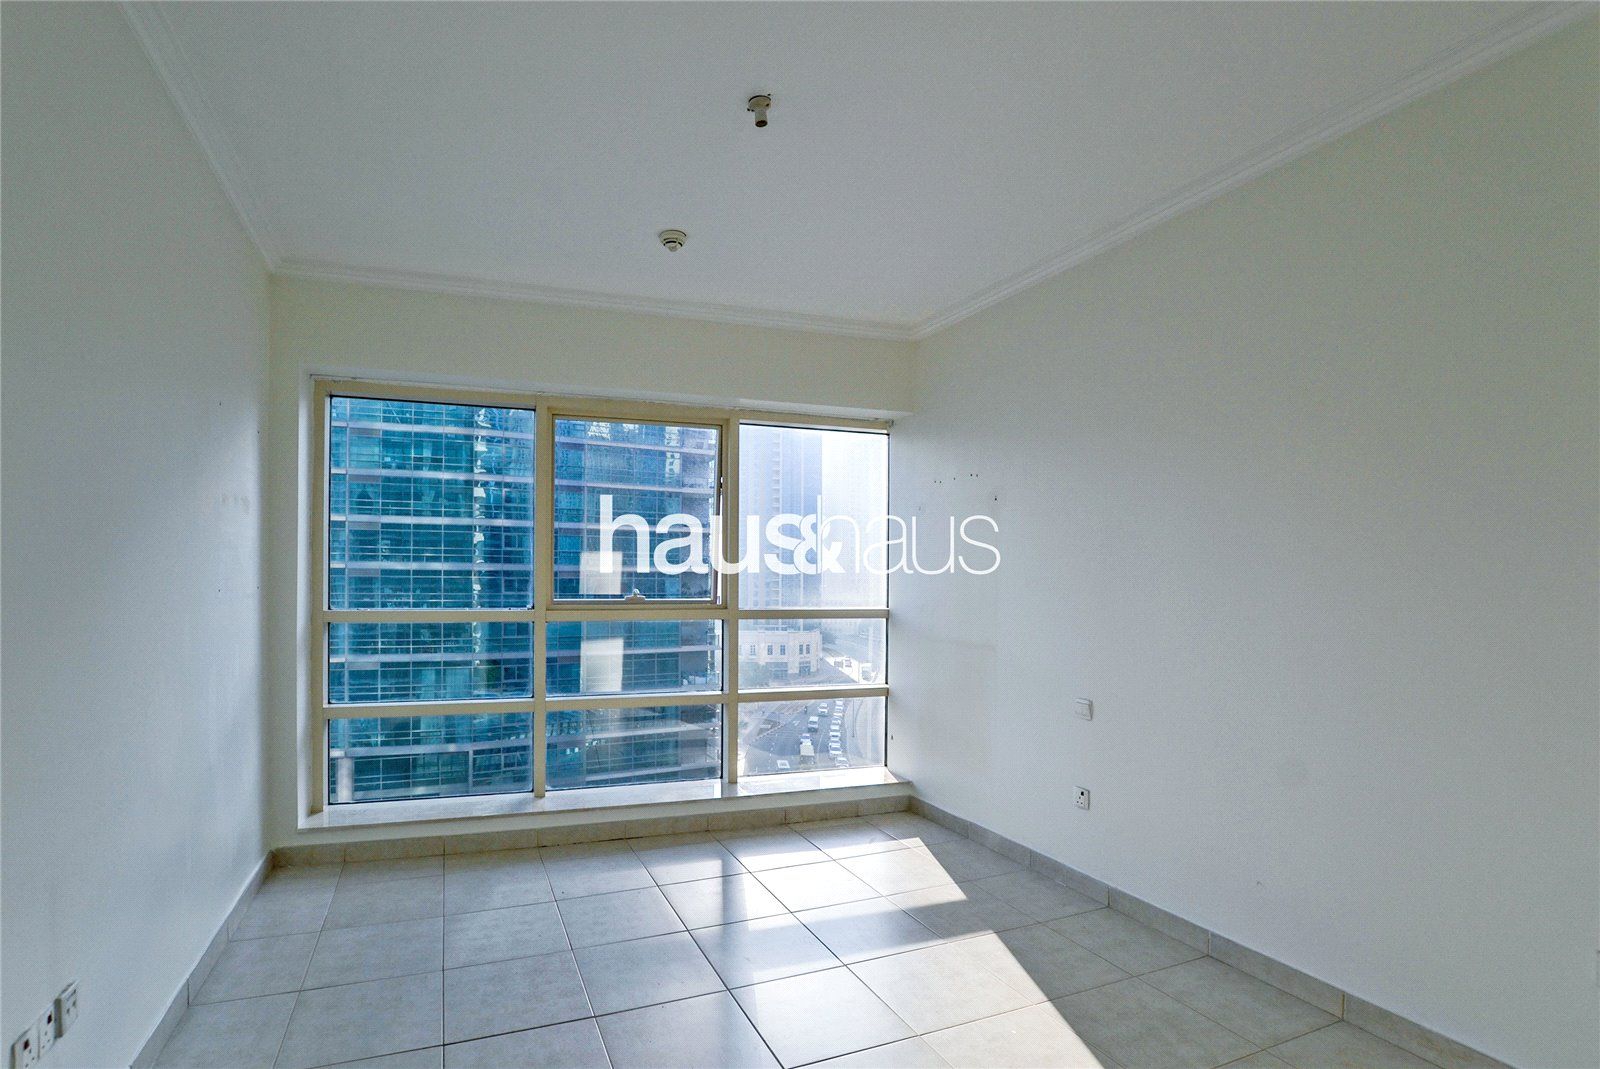 Bright | central and stylish 1BR in EMAAR building